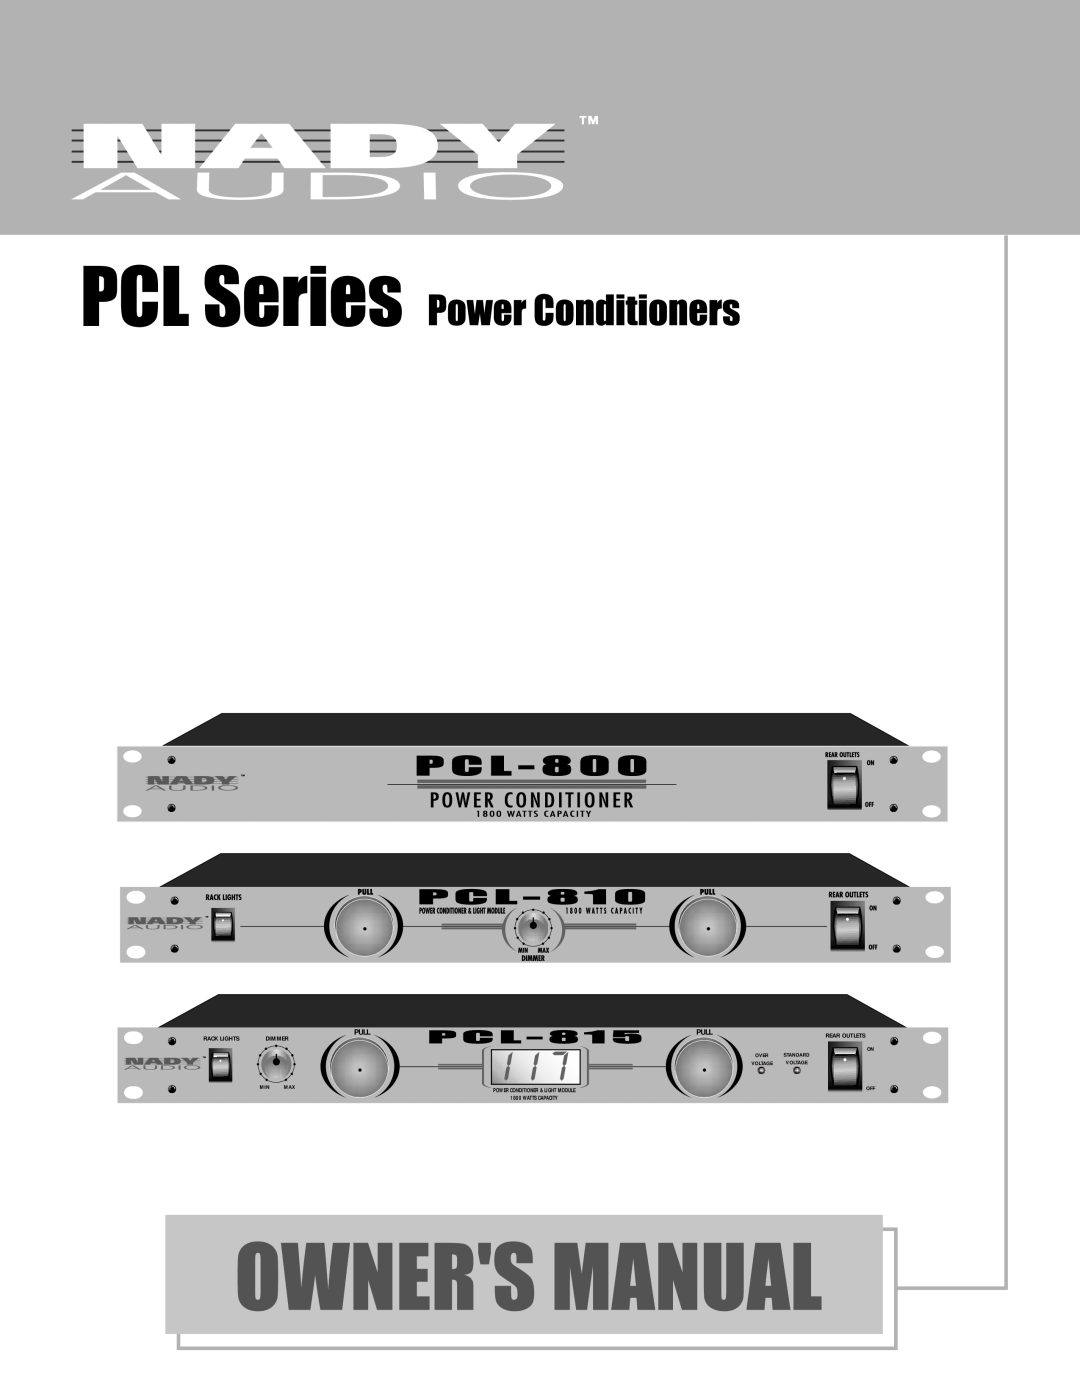 Nady Systems PCL815 manual Rack Lights, Dimmer, POWER CONDITIONER & LIGHT MODULE 1800 WATTS CAPACITY, Pull, Rear Outlets 